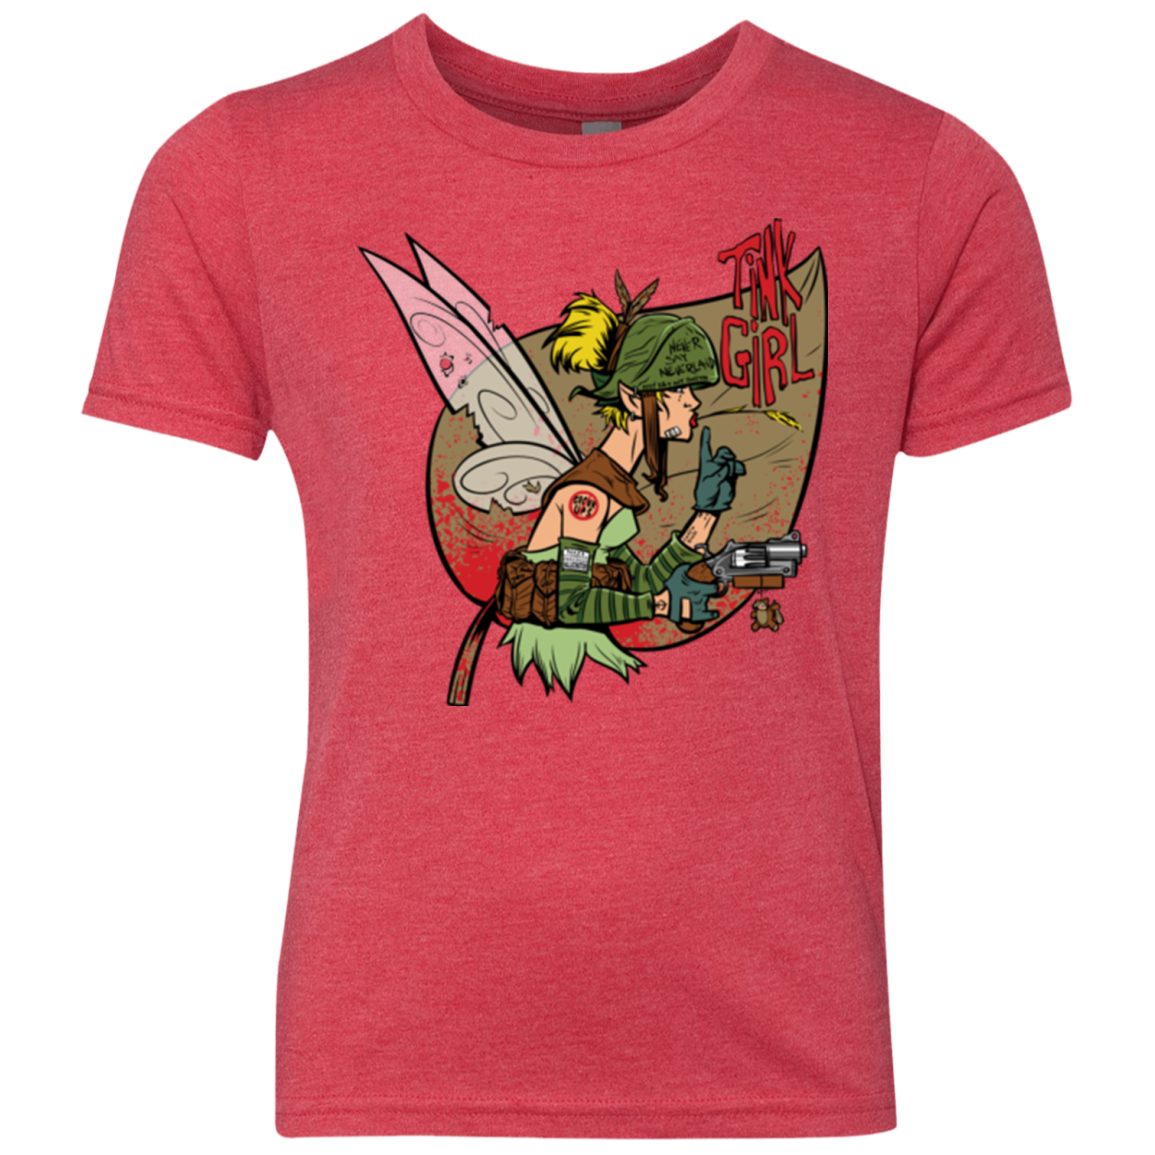 Tink Girl Youth Triblend T-Shirt